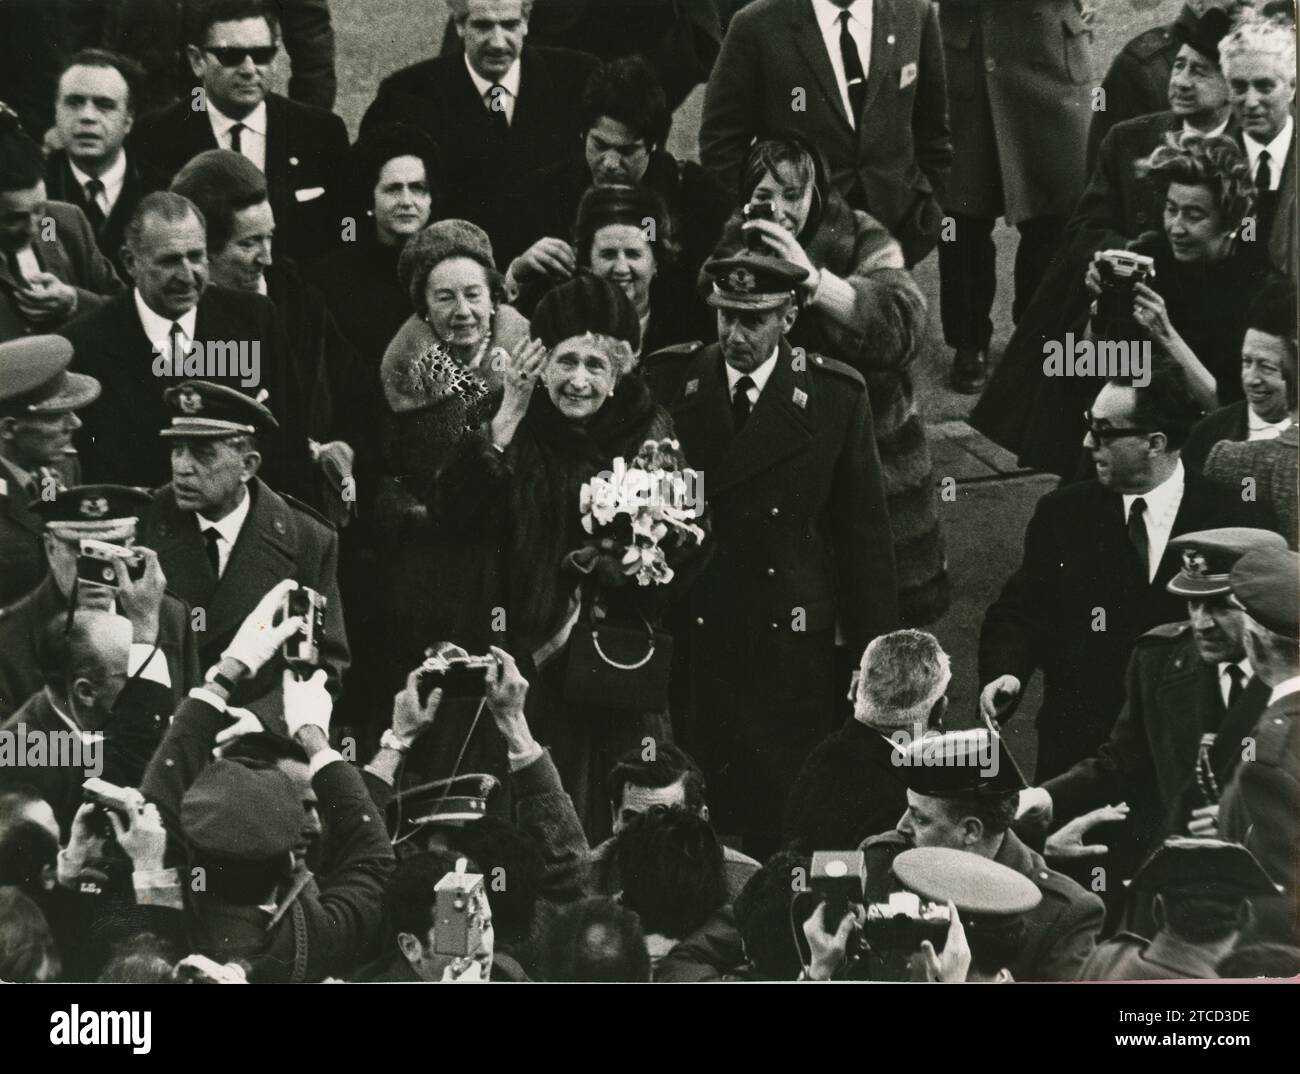 Madrid, 02/07/1968. Queen Victoria Eugenia visits Madrid on the occasion of the birth of her great-grandson, the Infante Don Felipe. In the image, he greets the crowd that came to welcome him upon his arrival at Barajas Airport. Credit: Album / Archivo ABC / Teodoro Naranjo Domínguez,Manuel Sanz Bermejo Stock Photo